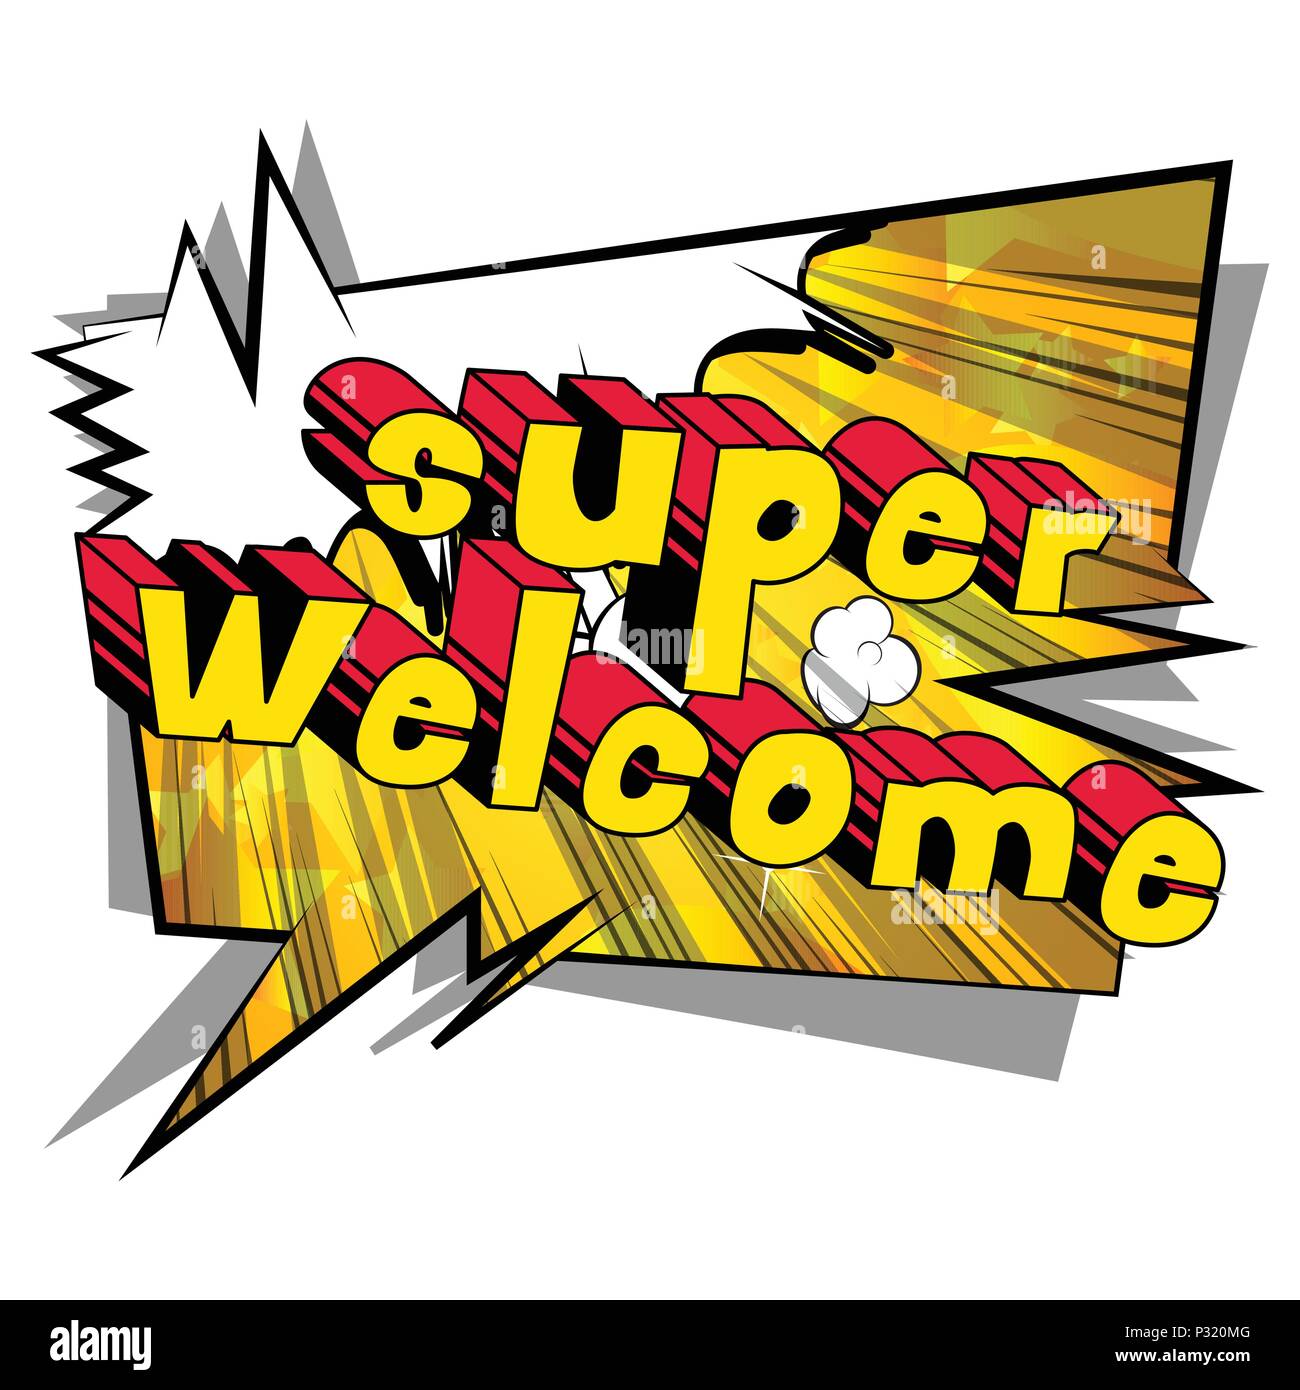 Super Cute - Comic Book Style Word On Comic Book Abstract